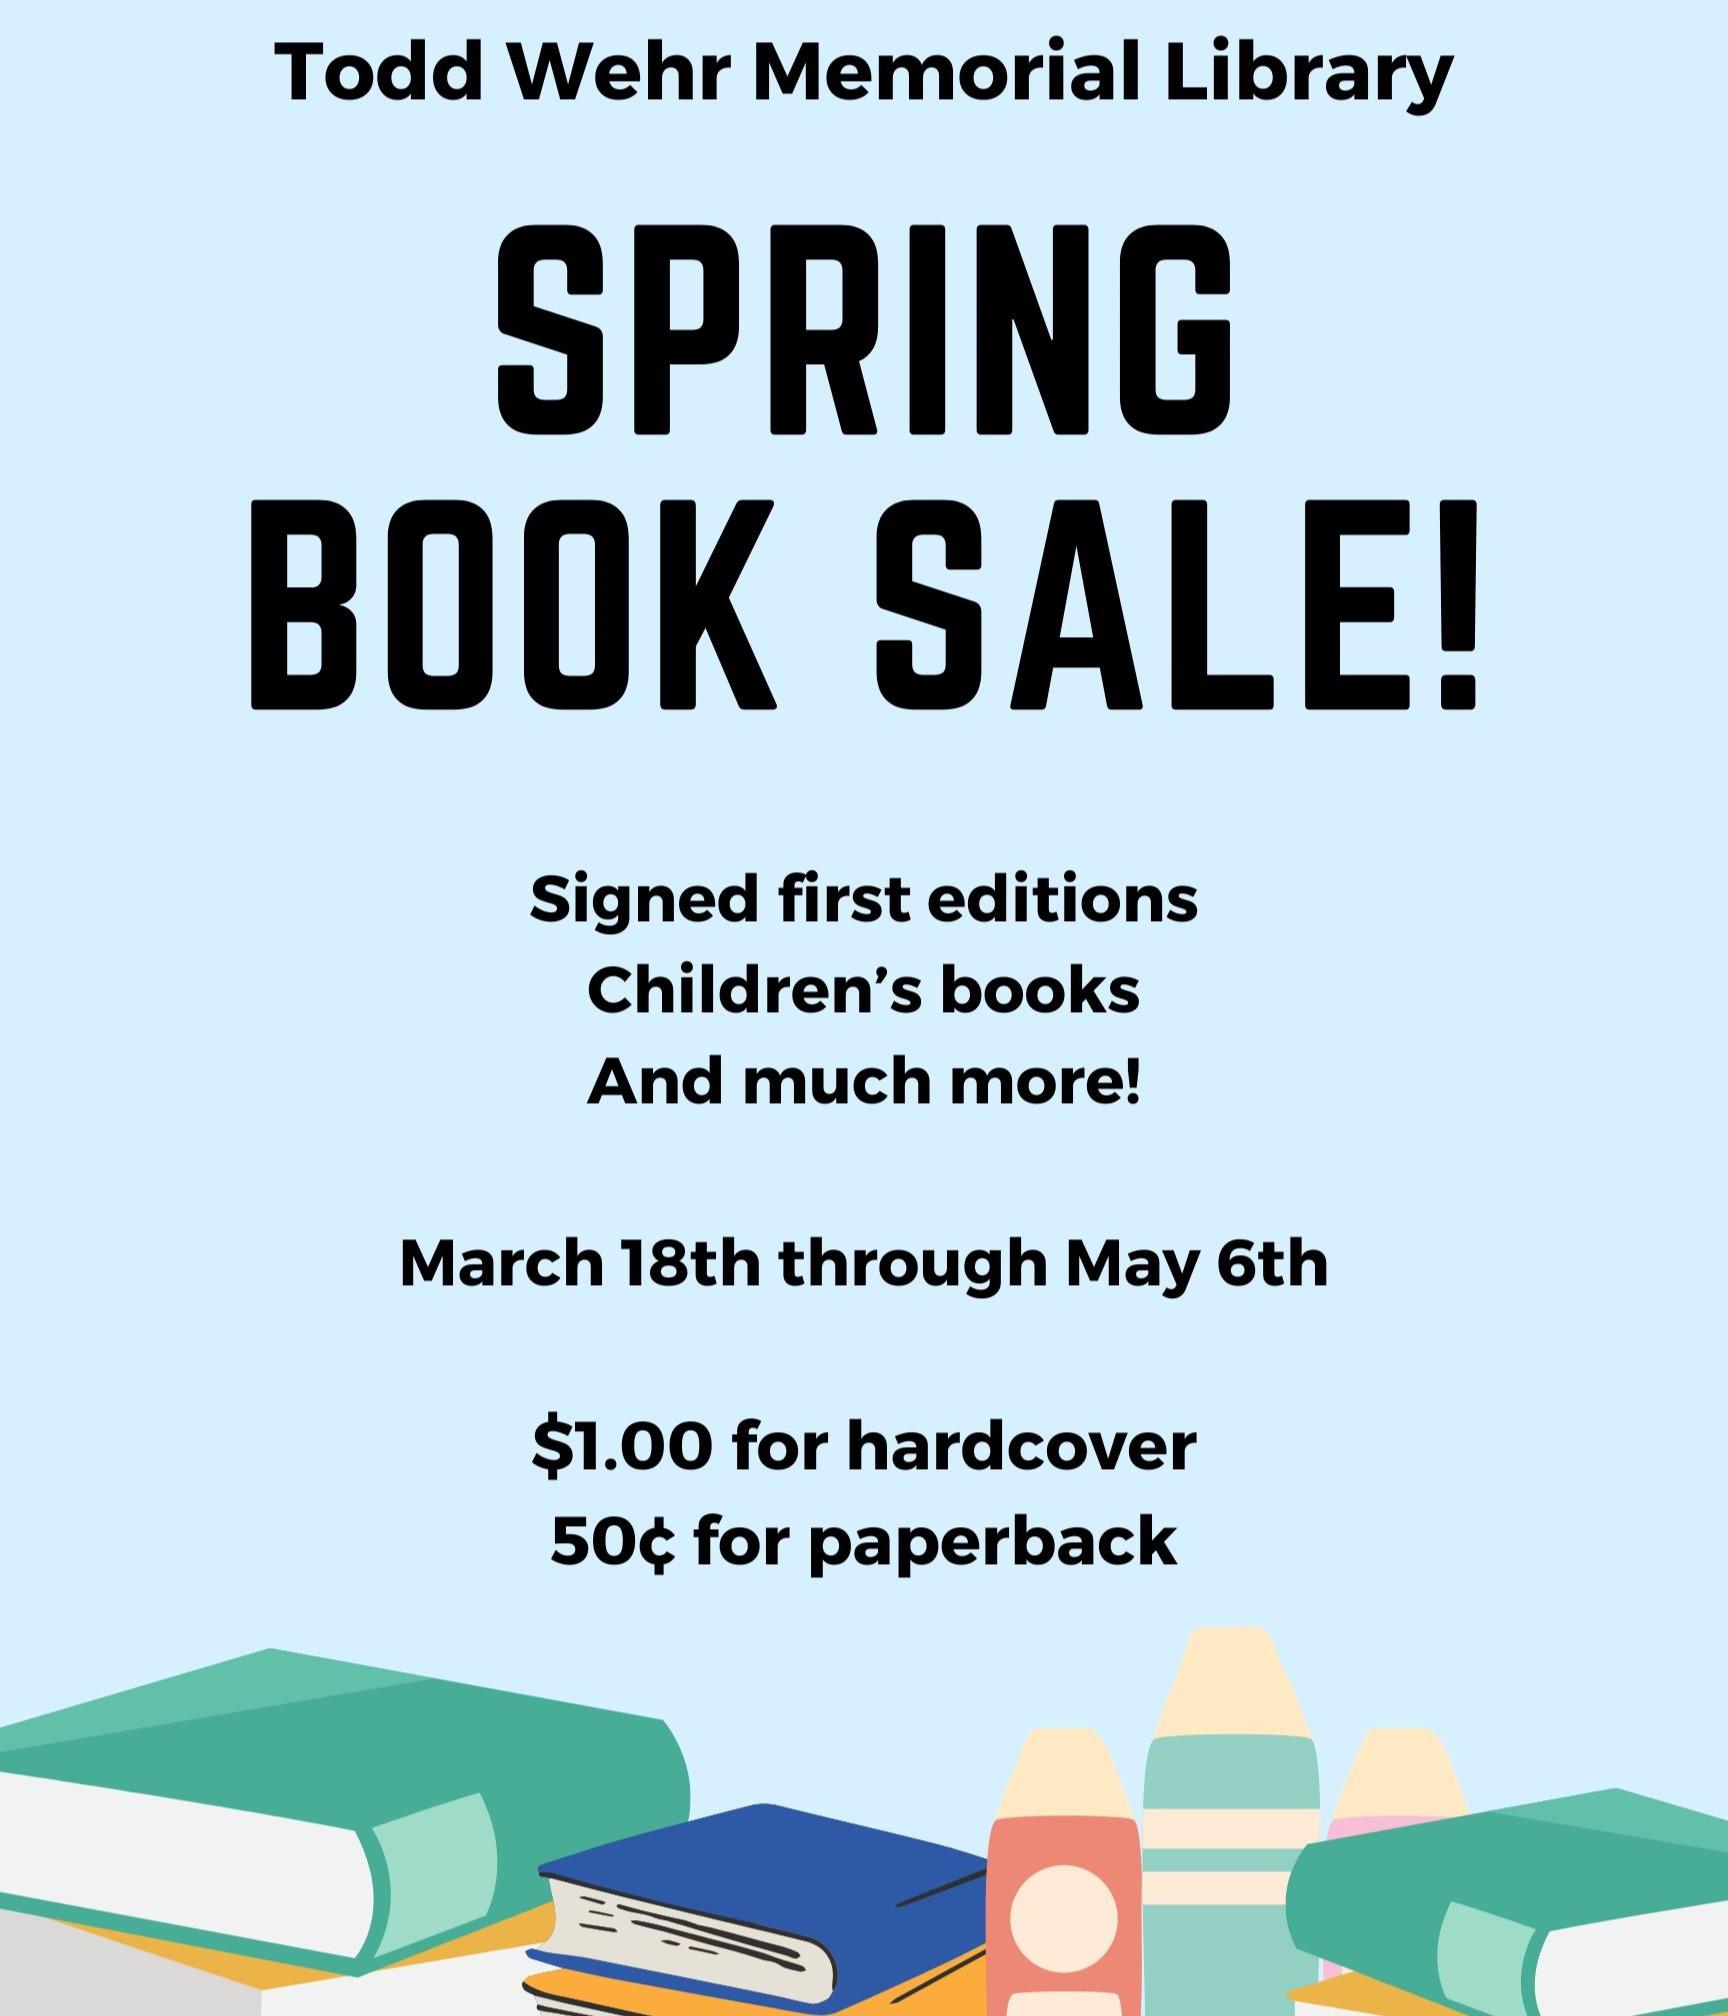 Todd Wehr Memorial Library Spring Book Sale! Signed first editions, children's books, and much more! March 18th through May 6th. $1.00 for hardcovers, $.50 for paperbacks.